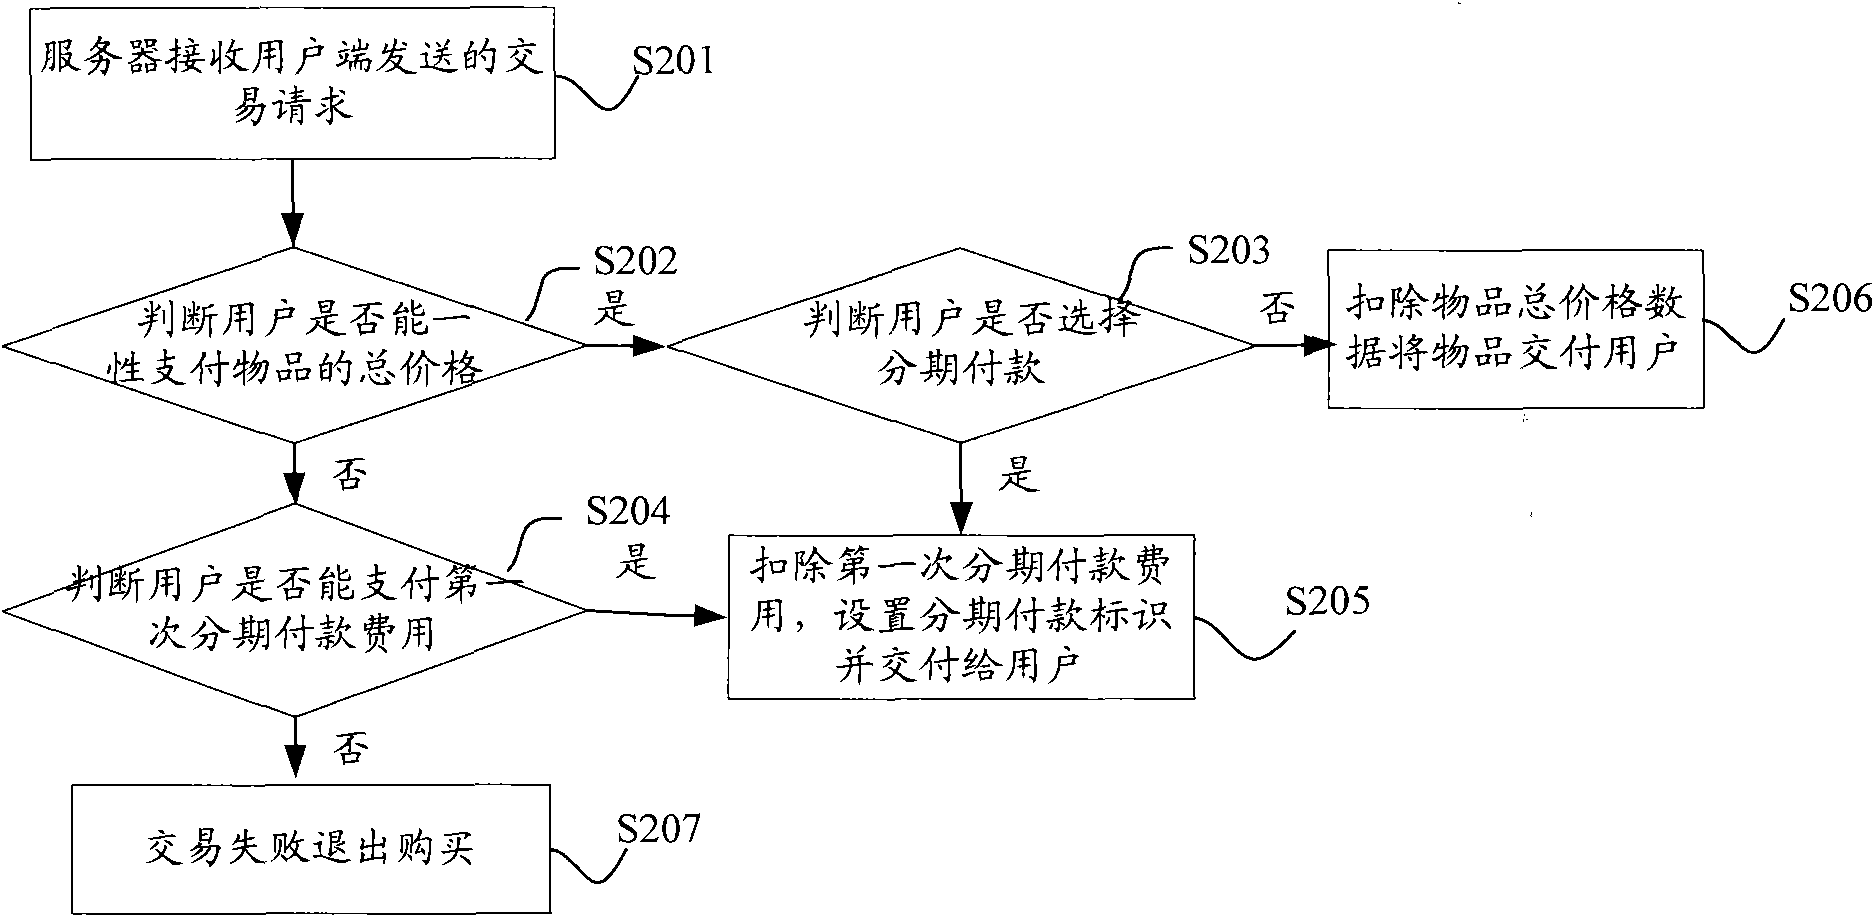 Method and system for processing transaction information